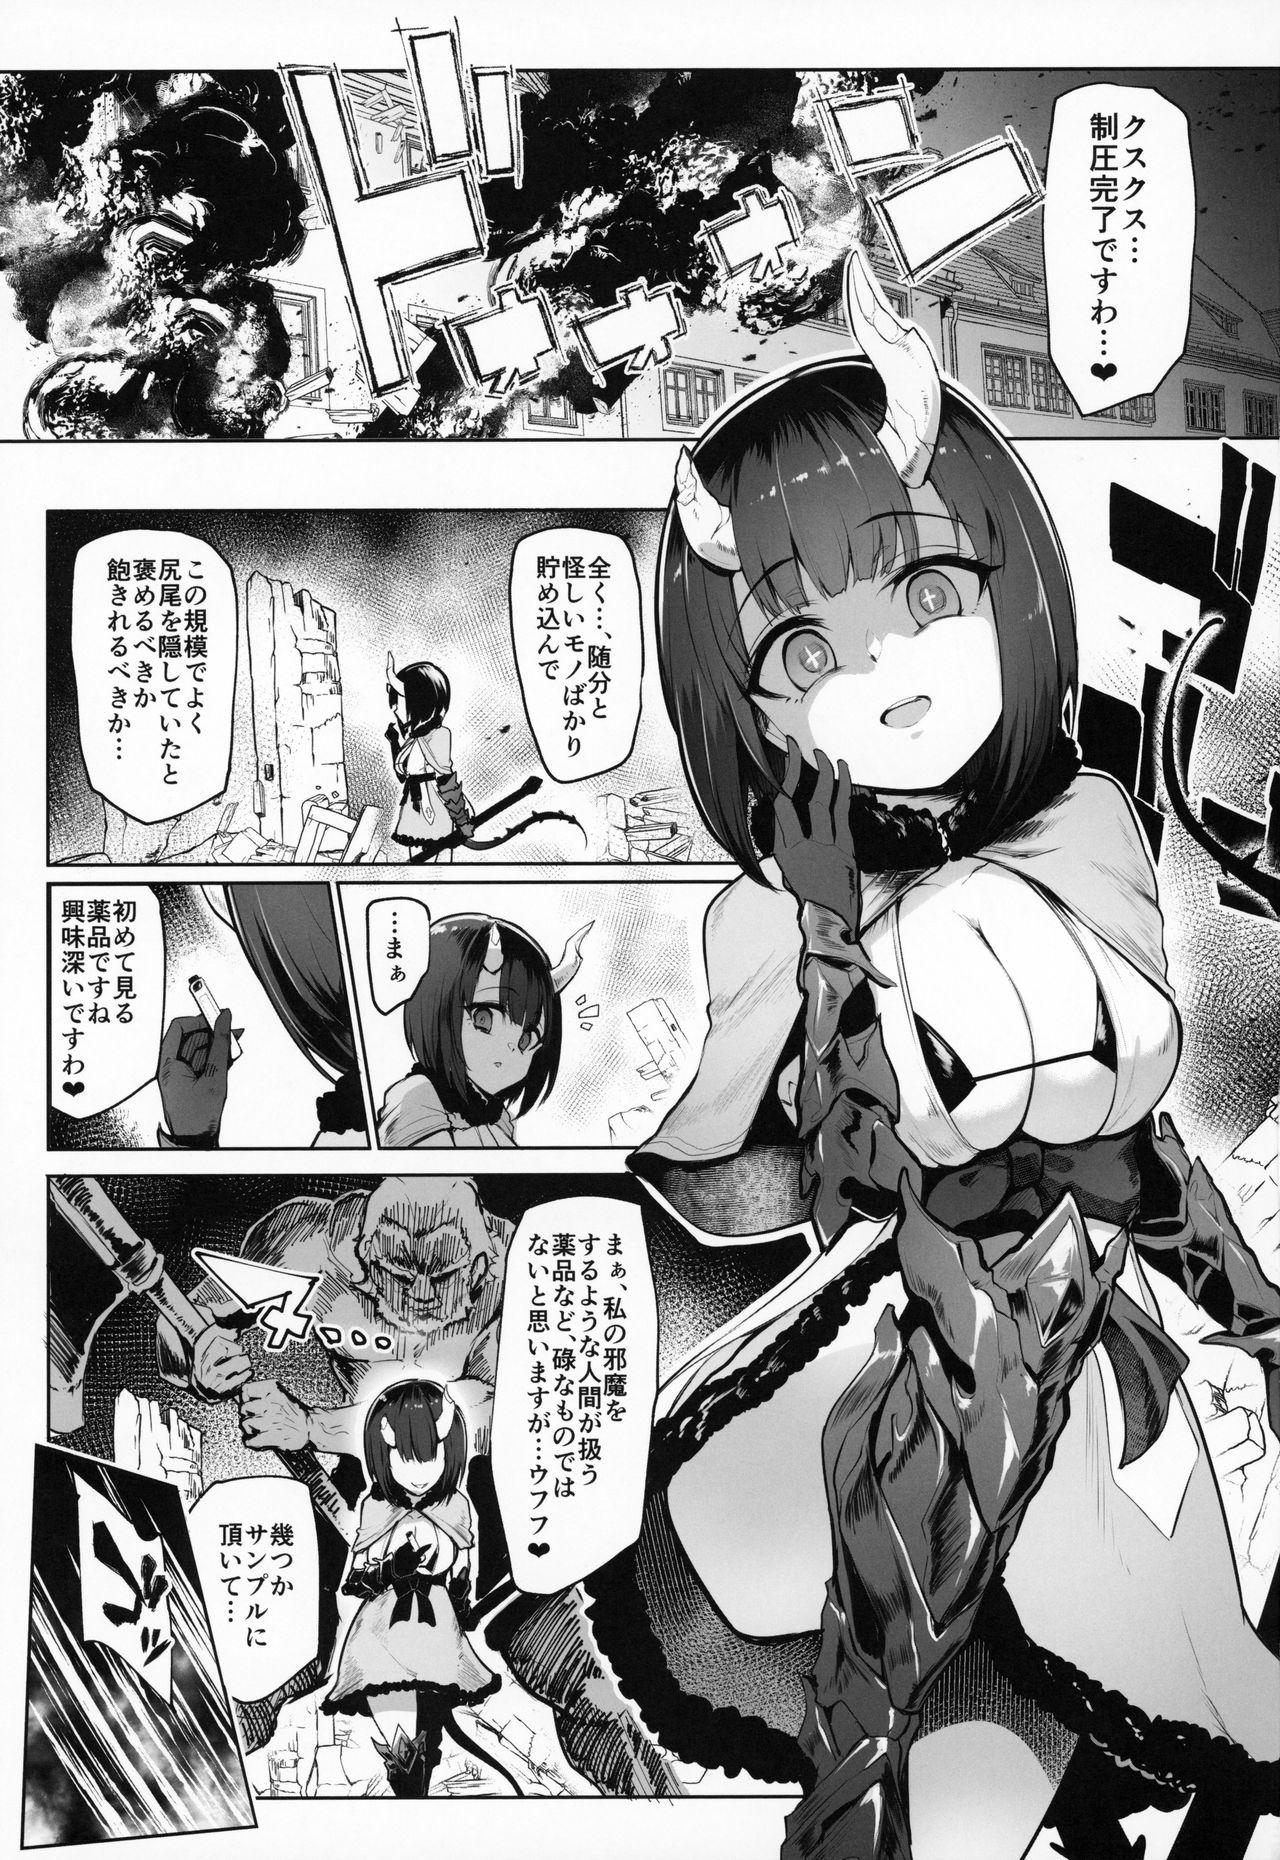 Assfingering DESTROYER DESTROYER - Princess connect Real Orgasms - Page 2